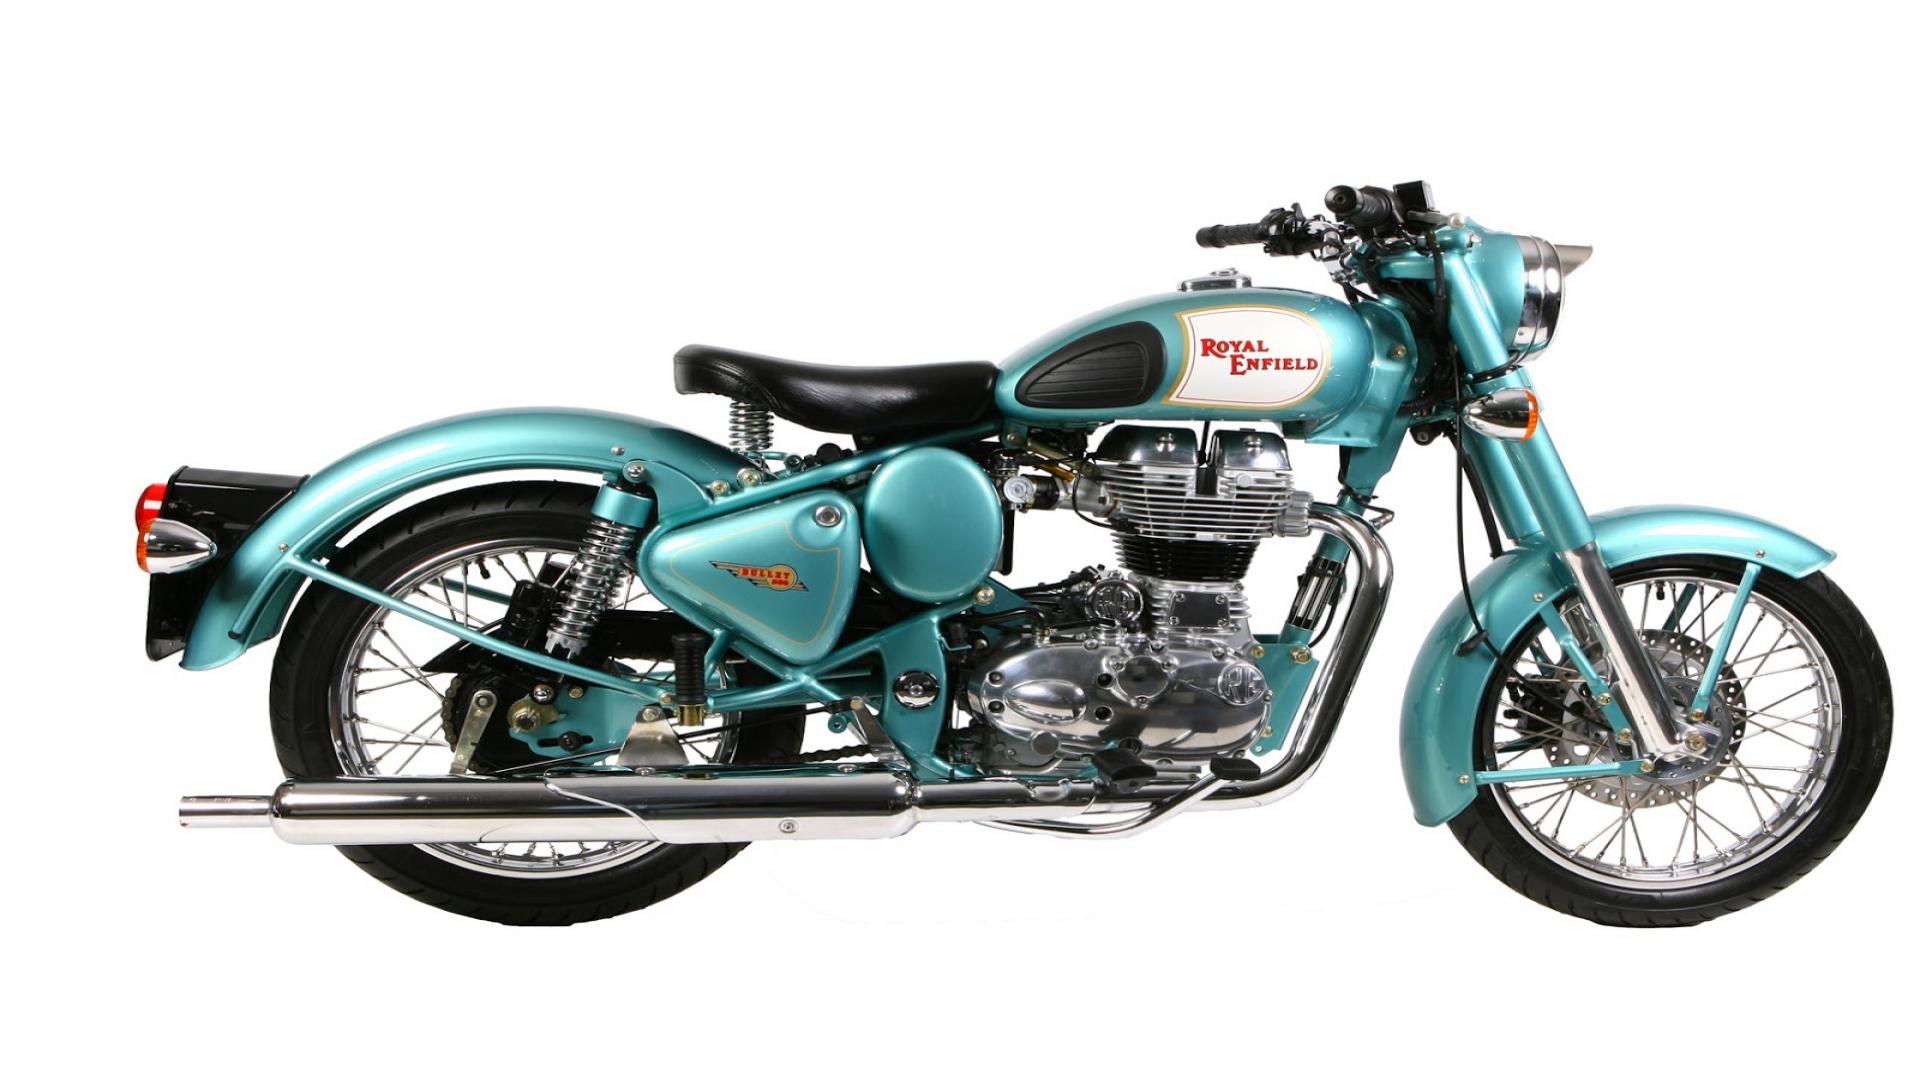 Royal Enfield Classic 350 Price In Nepal 2019 - HD Wallpaper 